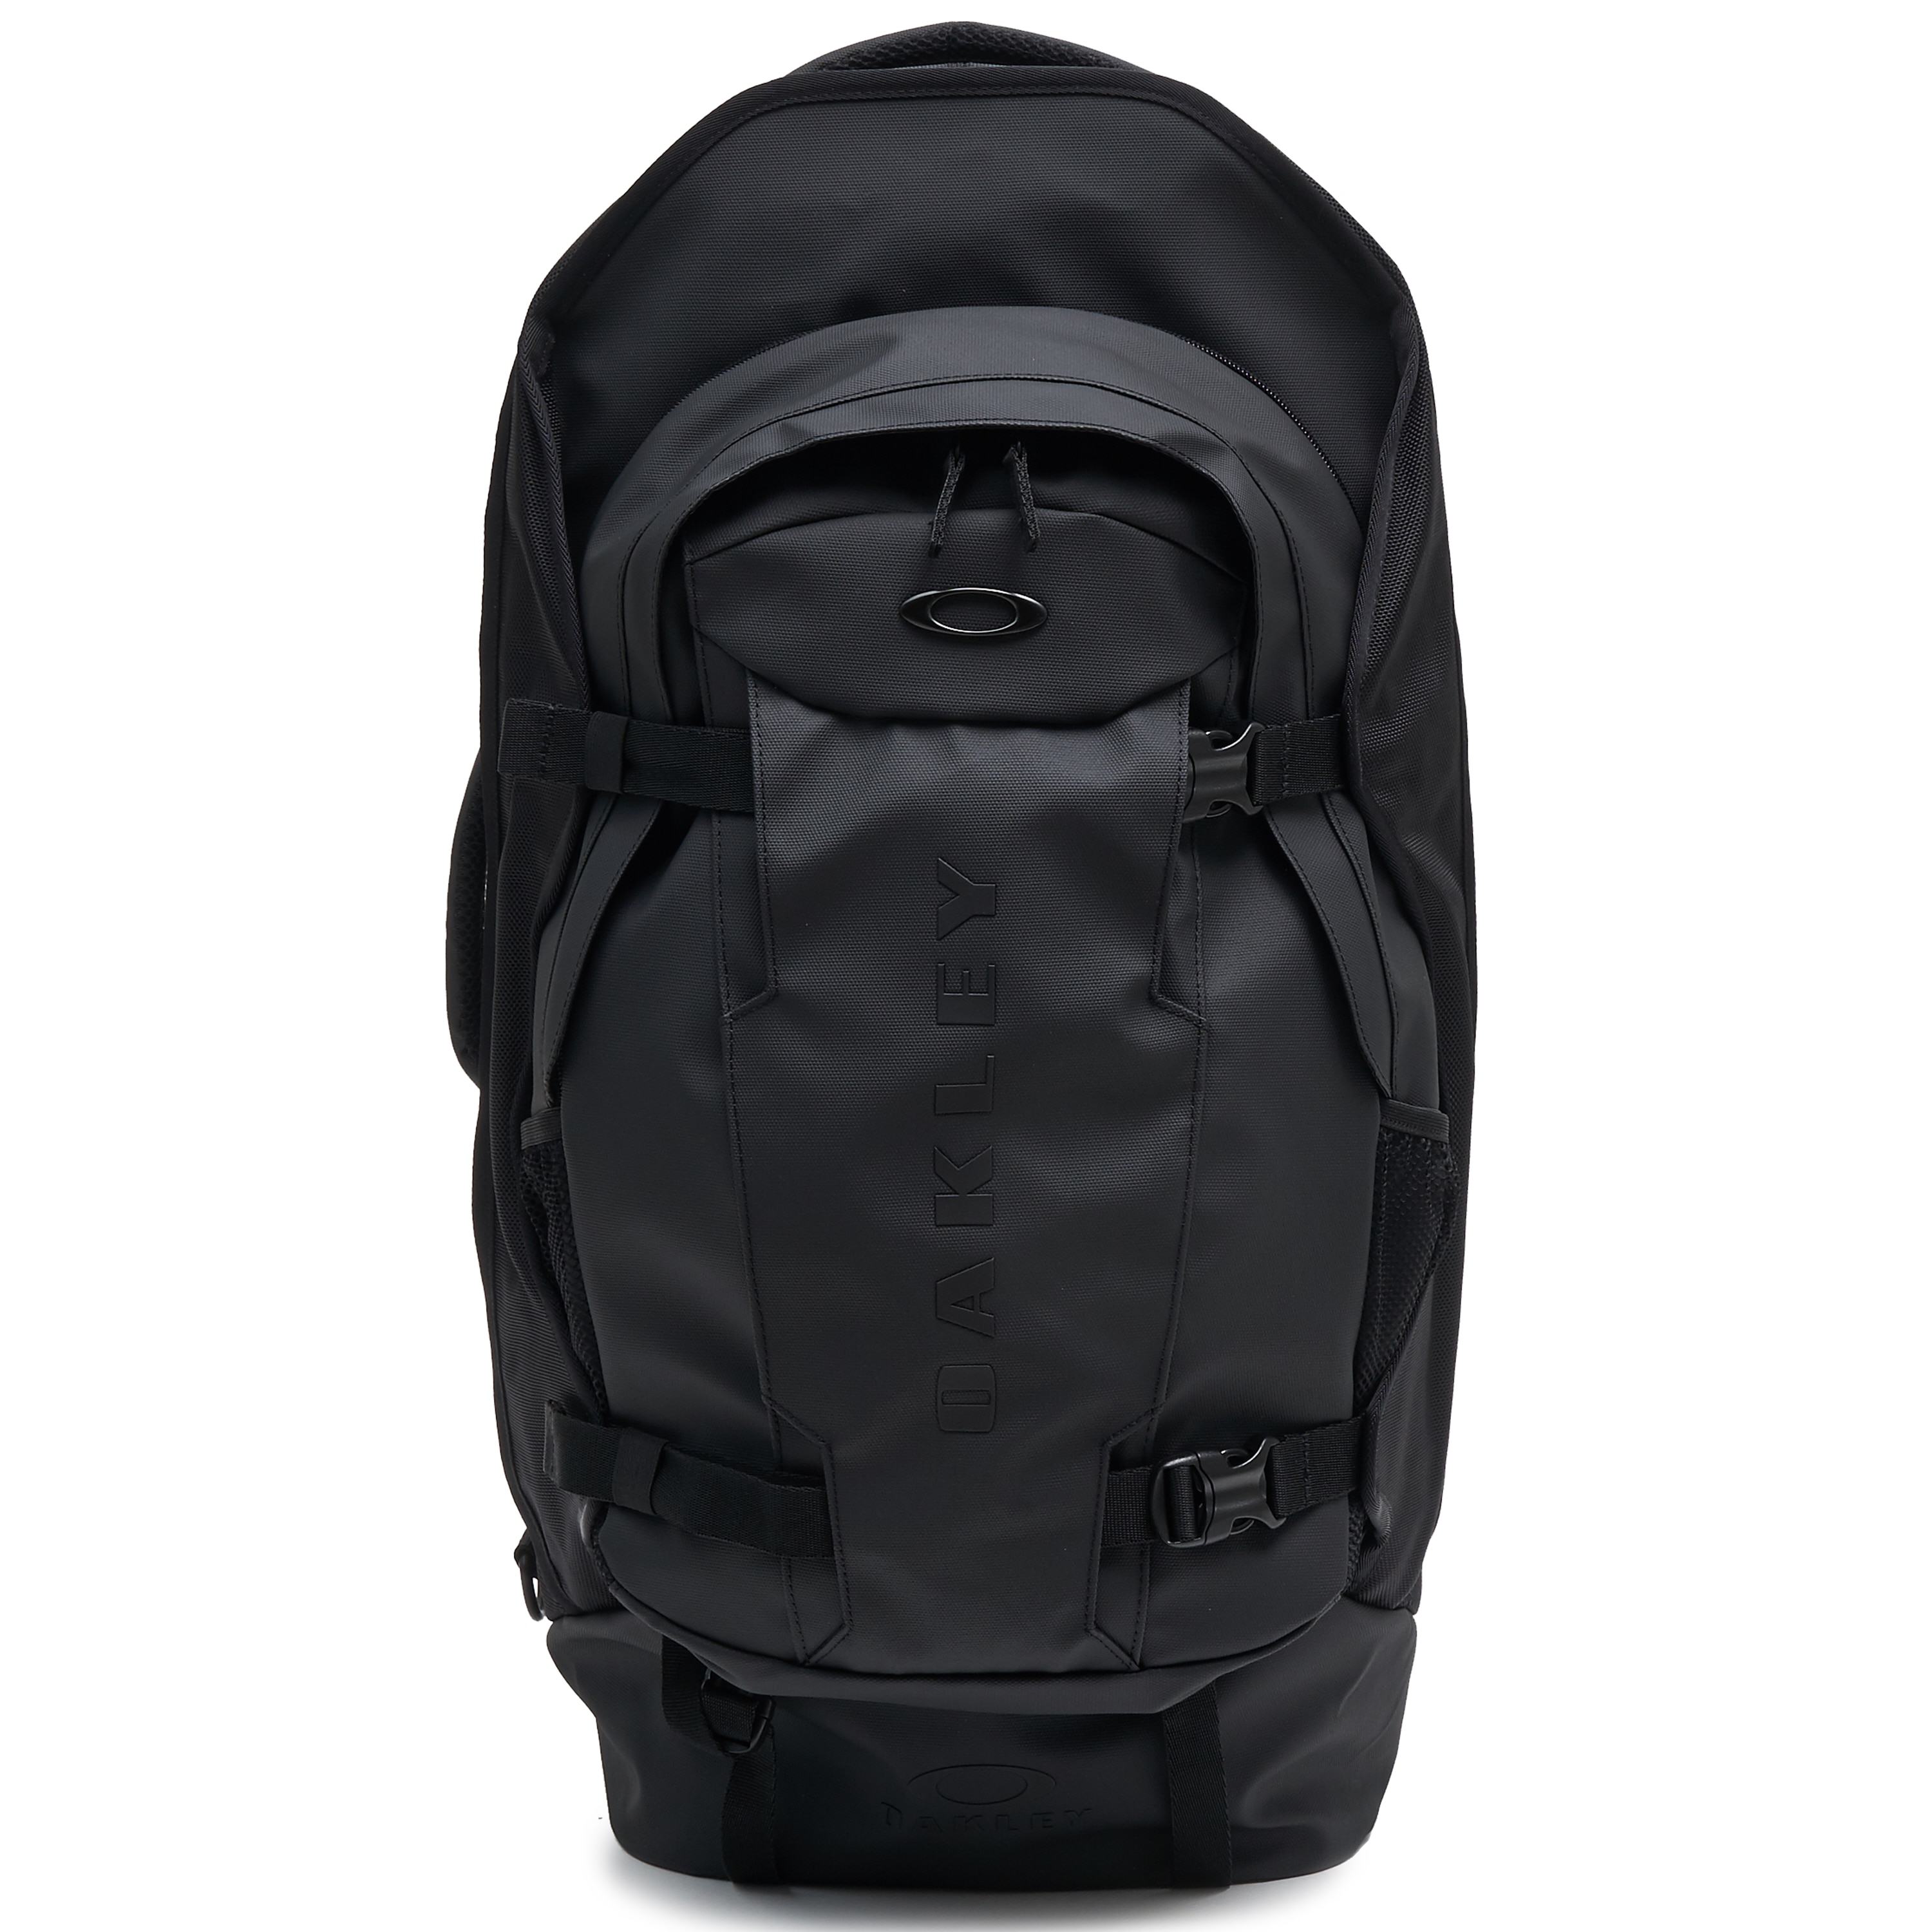 oakley carry on bags